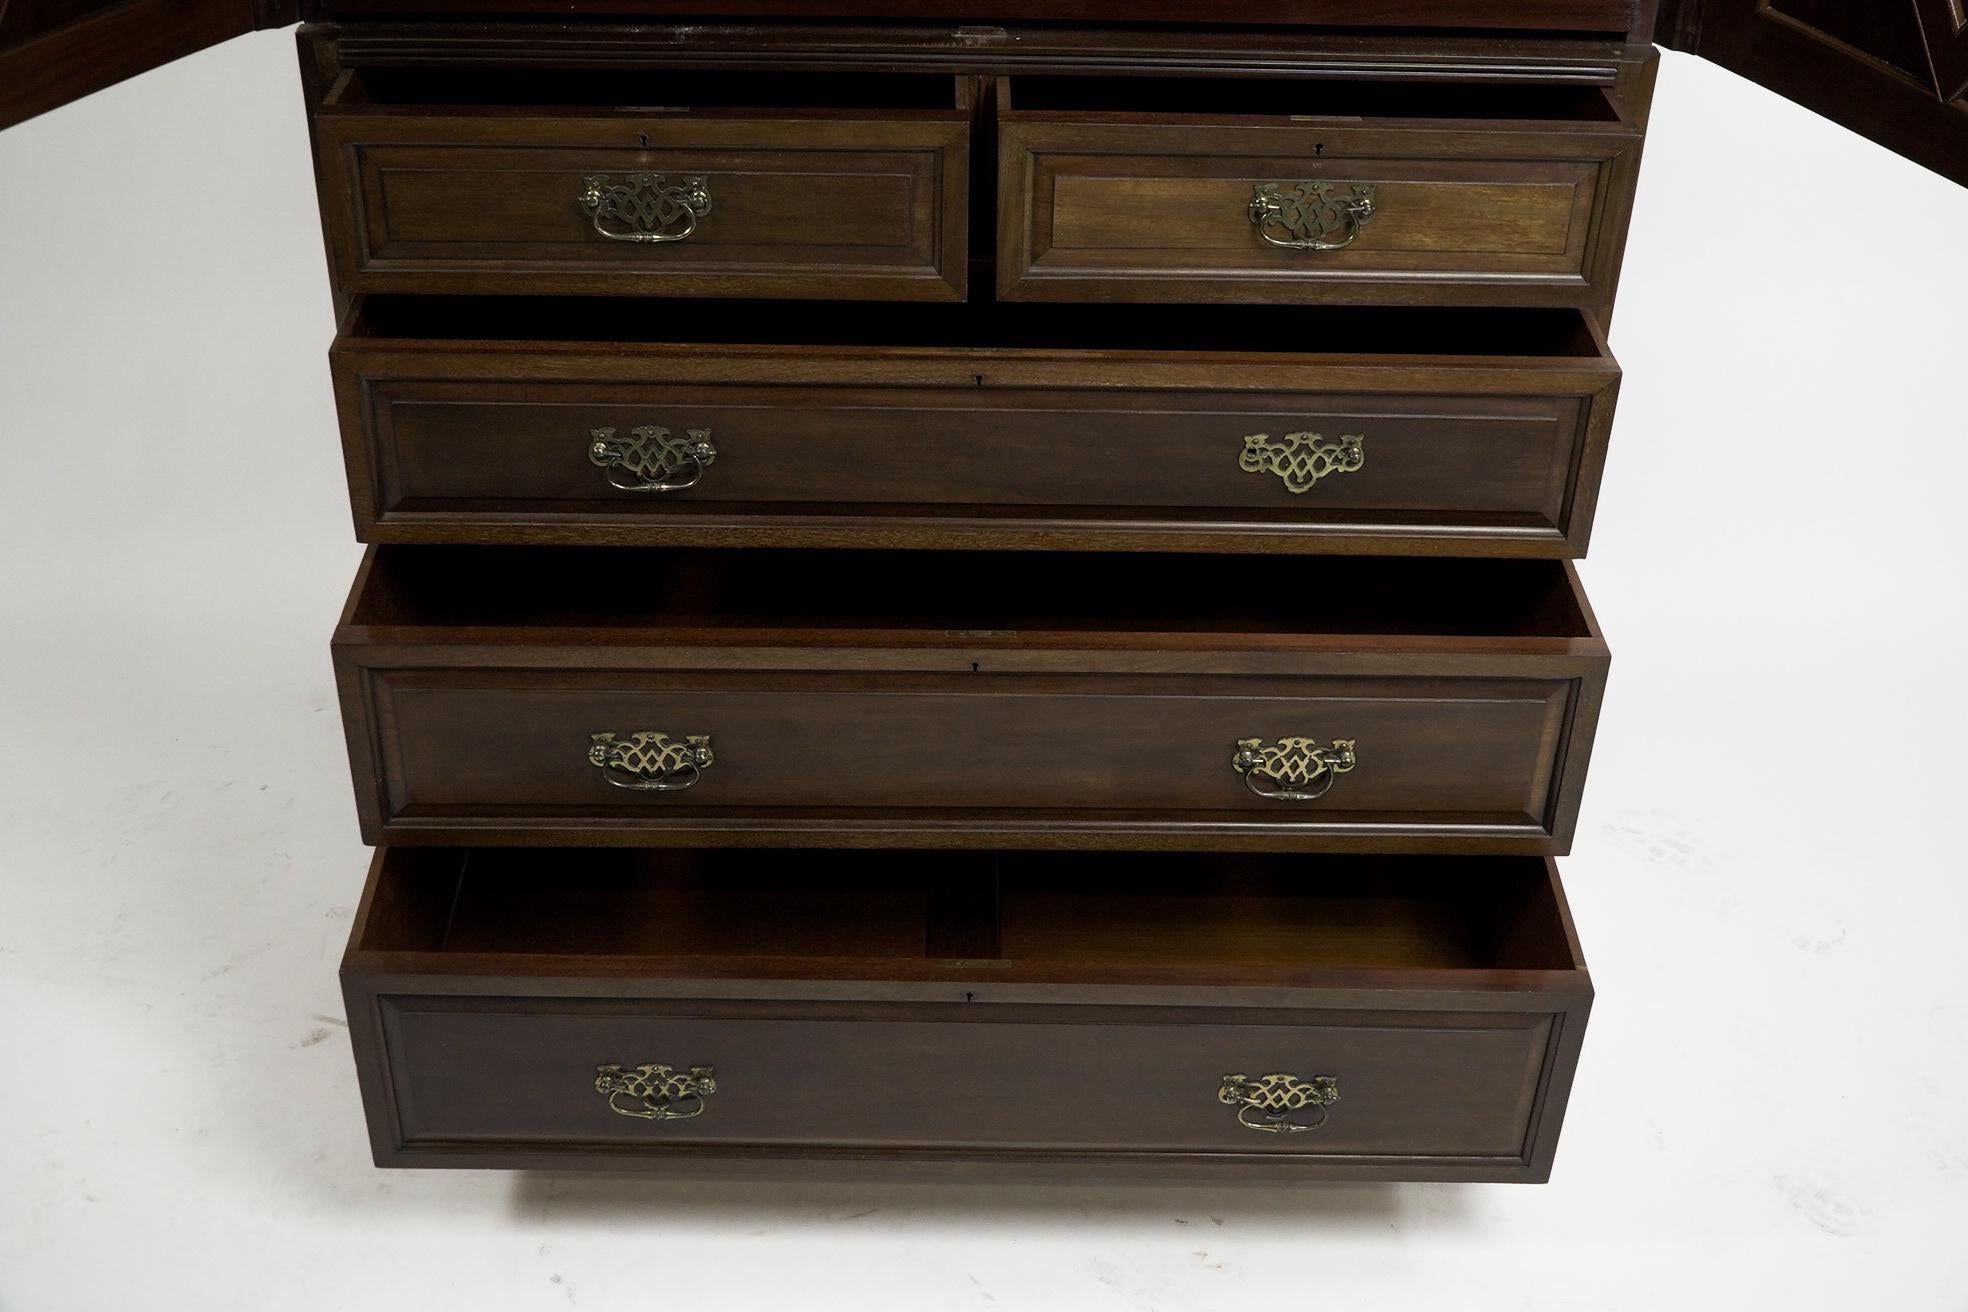 English Morris & Co. An Aesthetic Movement Walnut tallboy with internal sliding drawers. For Sale